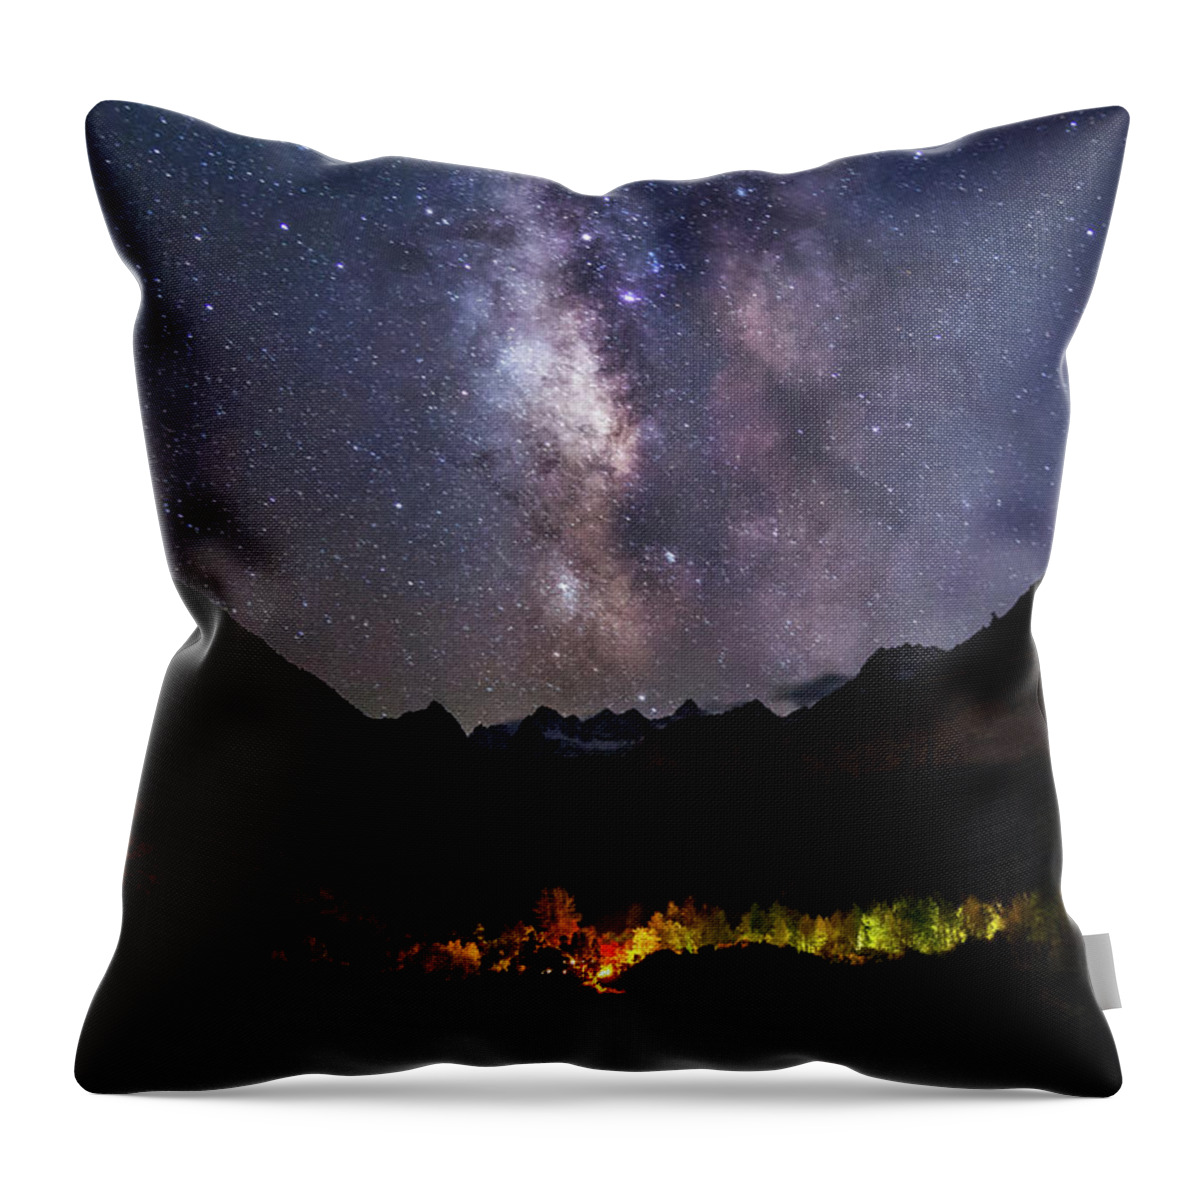 Aspendell Throw Pillow featuring the photograph Aspen Nights by Tassanee Angiolillo